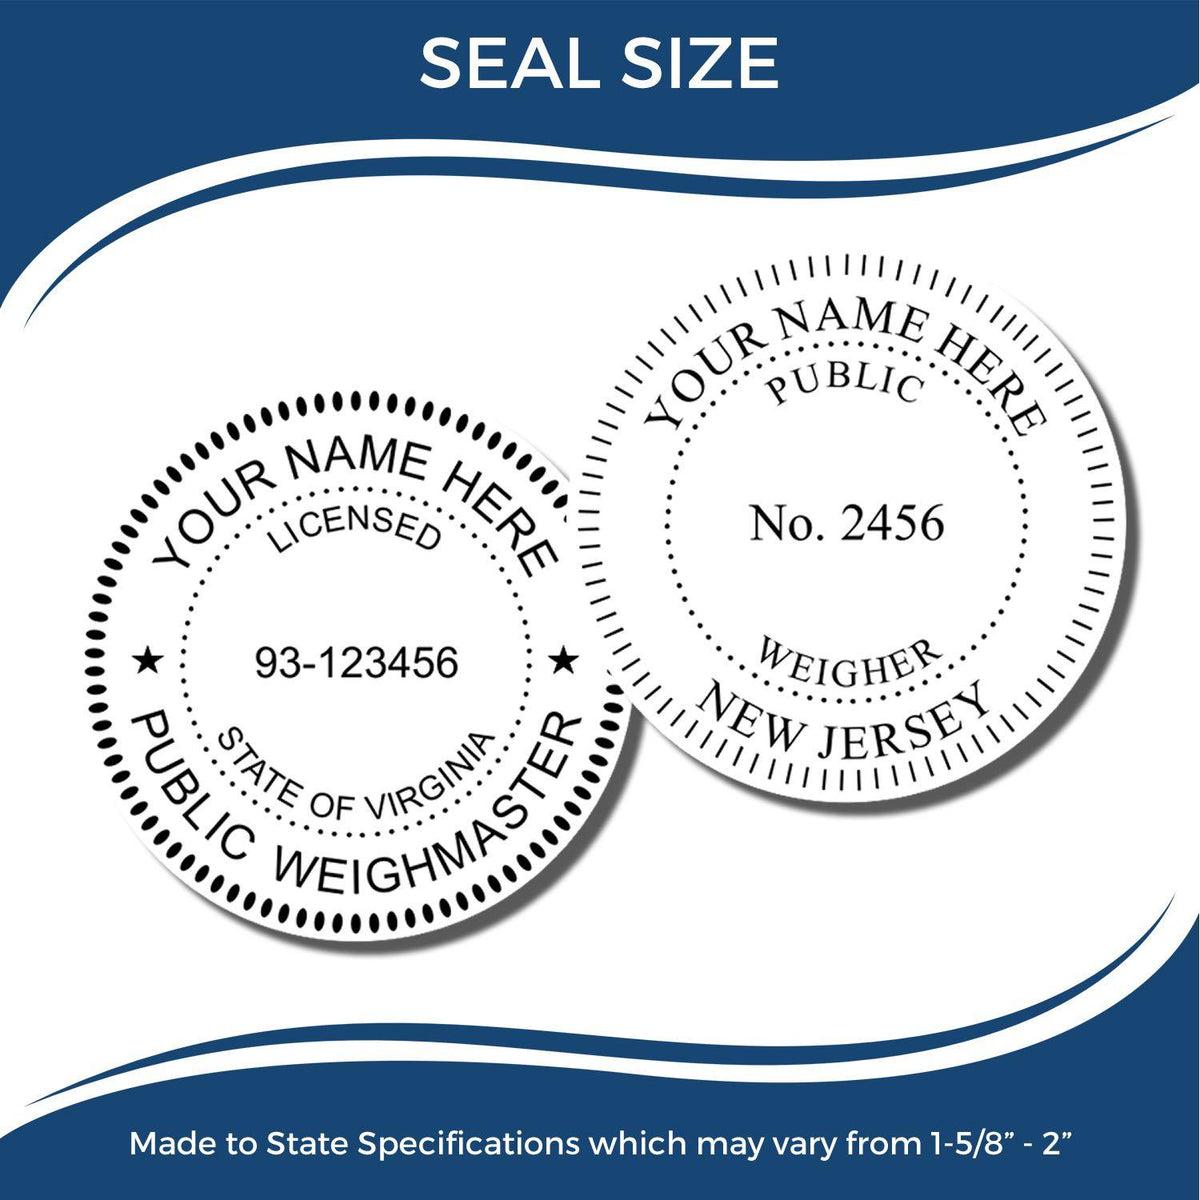 Xstamper Public Weighmaster Pre-Inked Rubber Stamp of Seal - Engineer Seal Stamps - Stamp Type_Pre-Inked, Type of Use_Professional